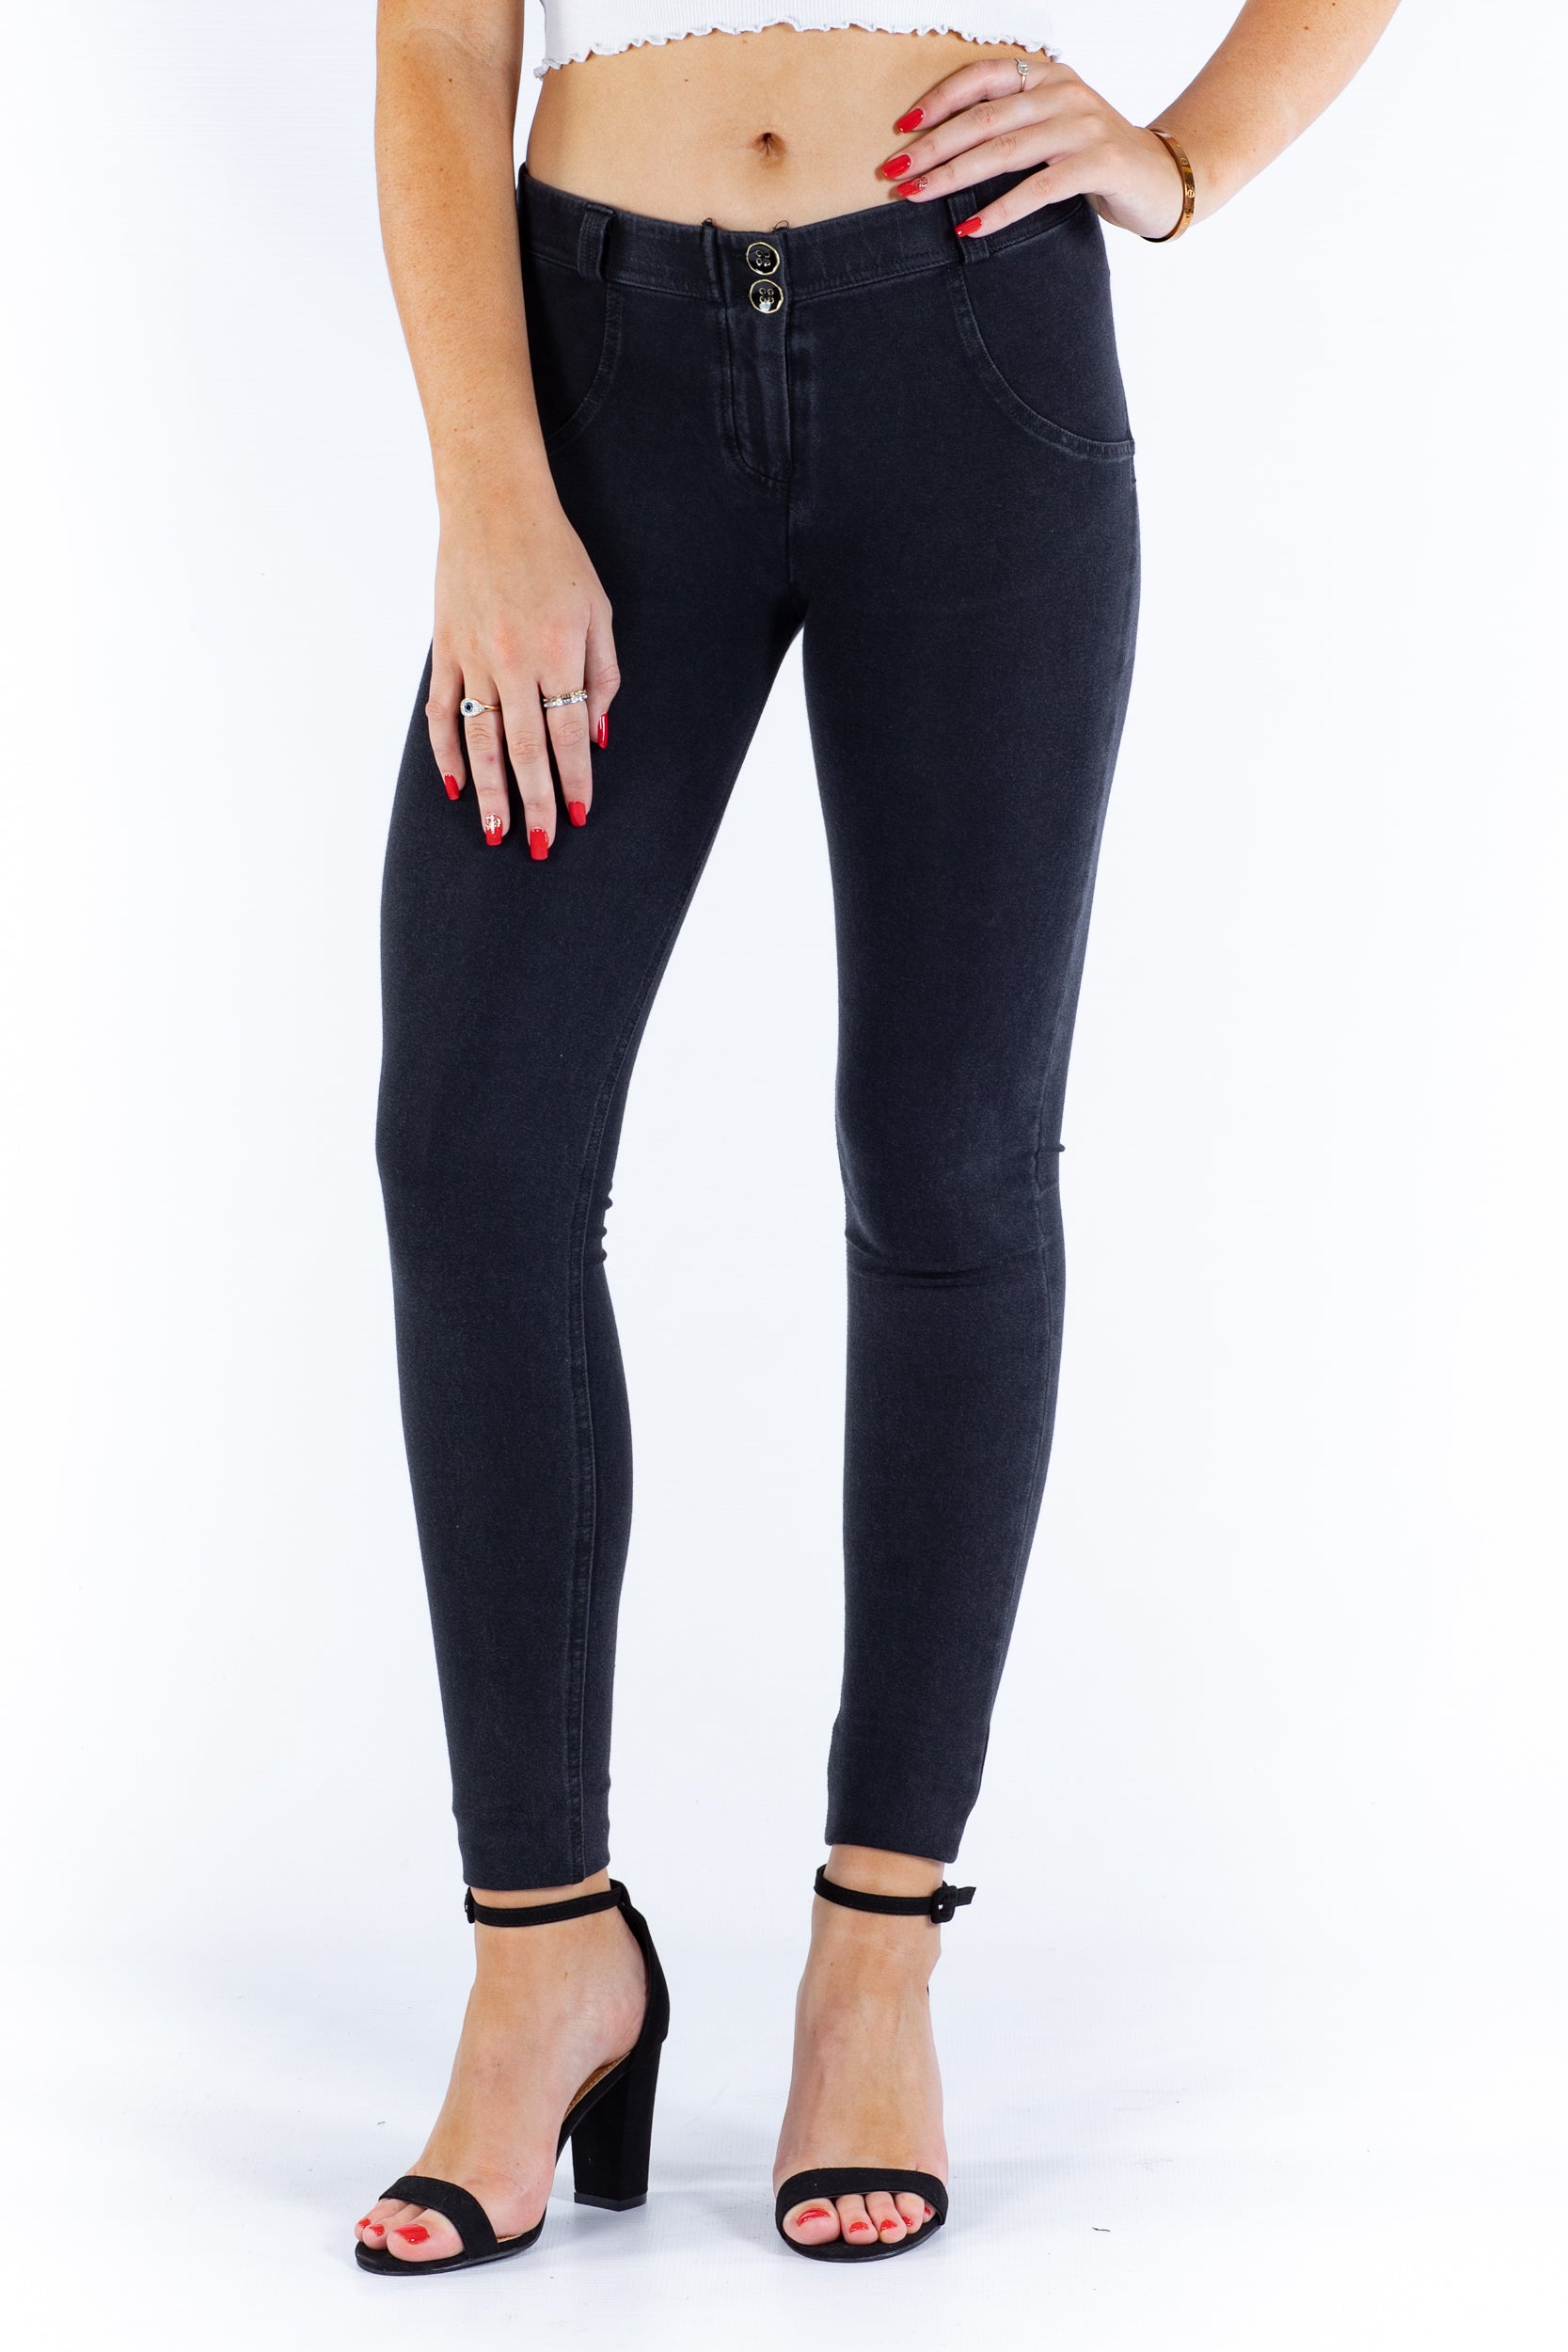 High waist Butt lifting Shaping jeans/Jeggings - Black Wash Black